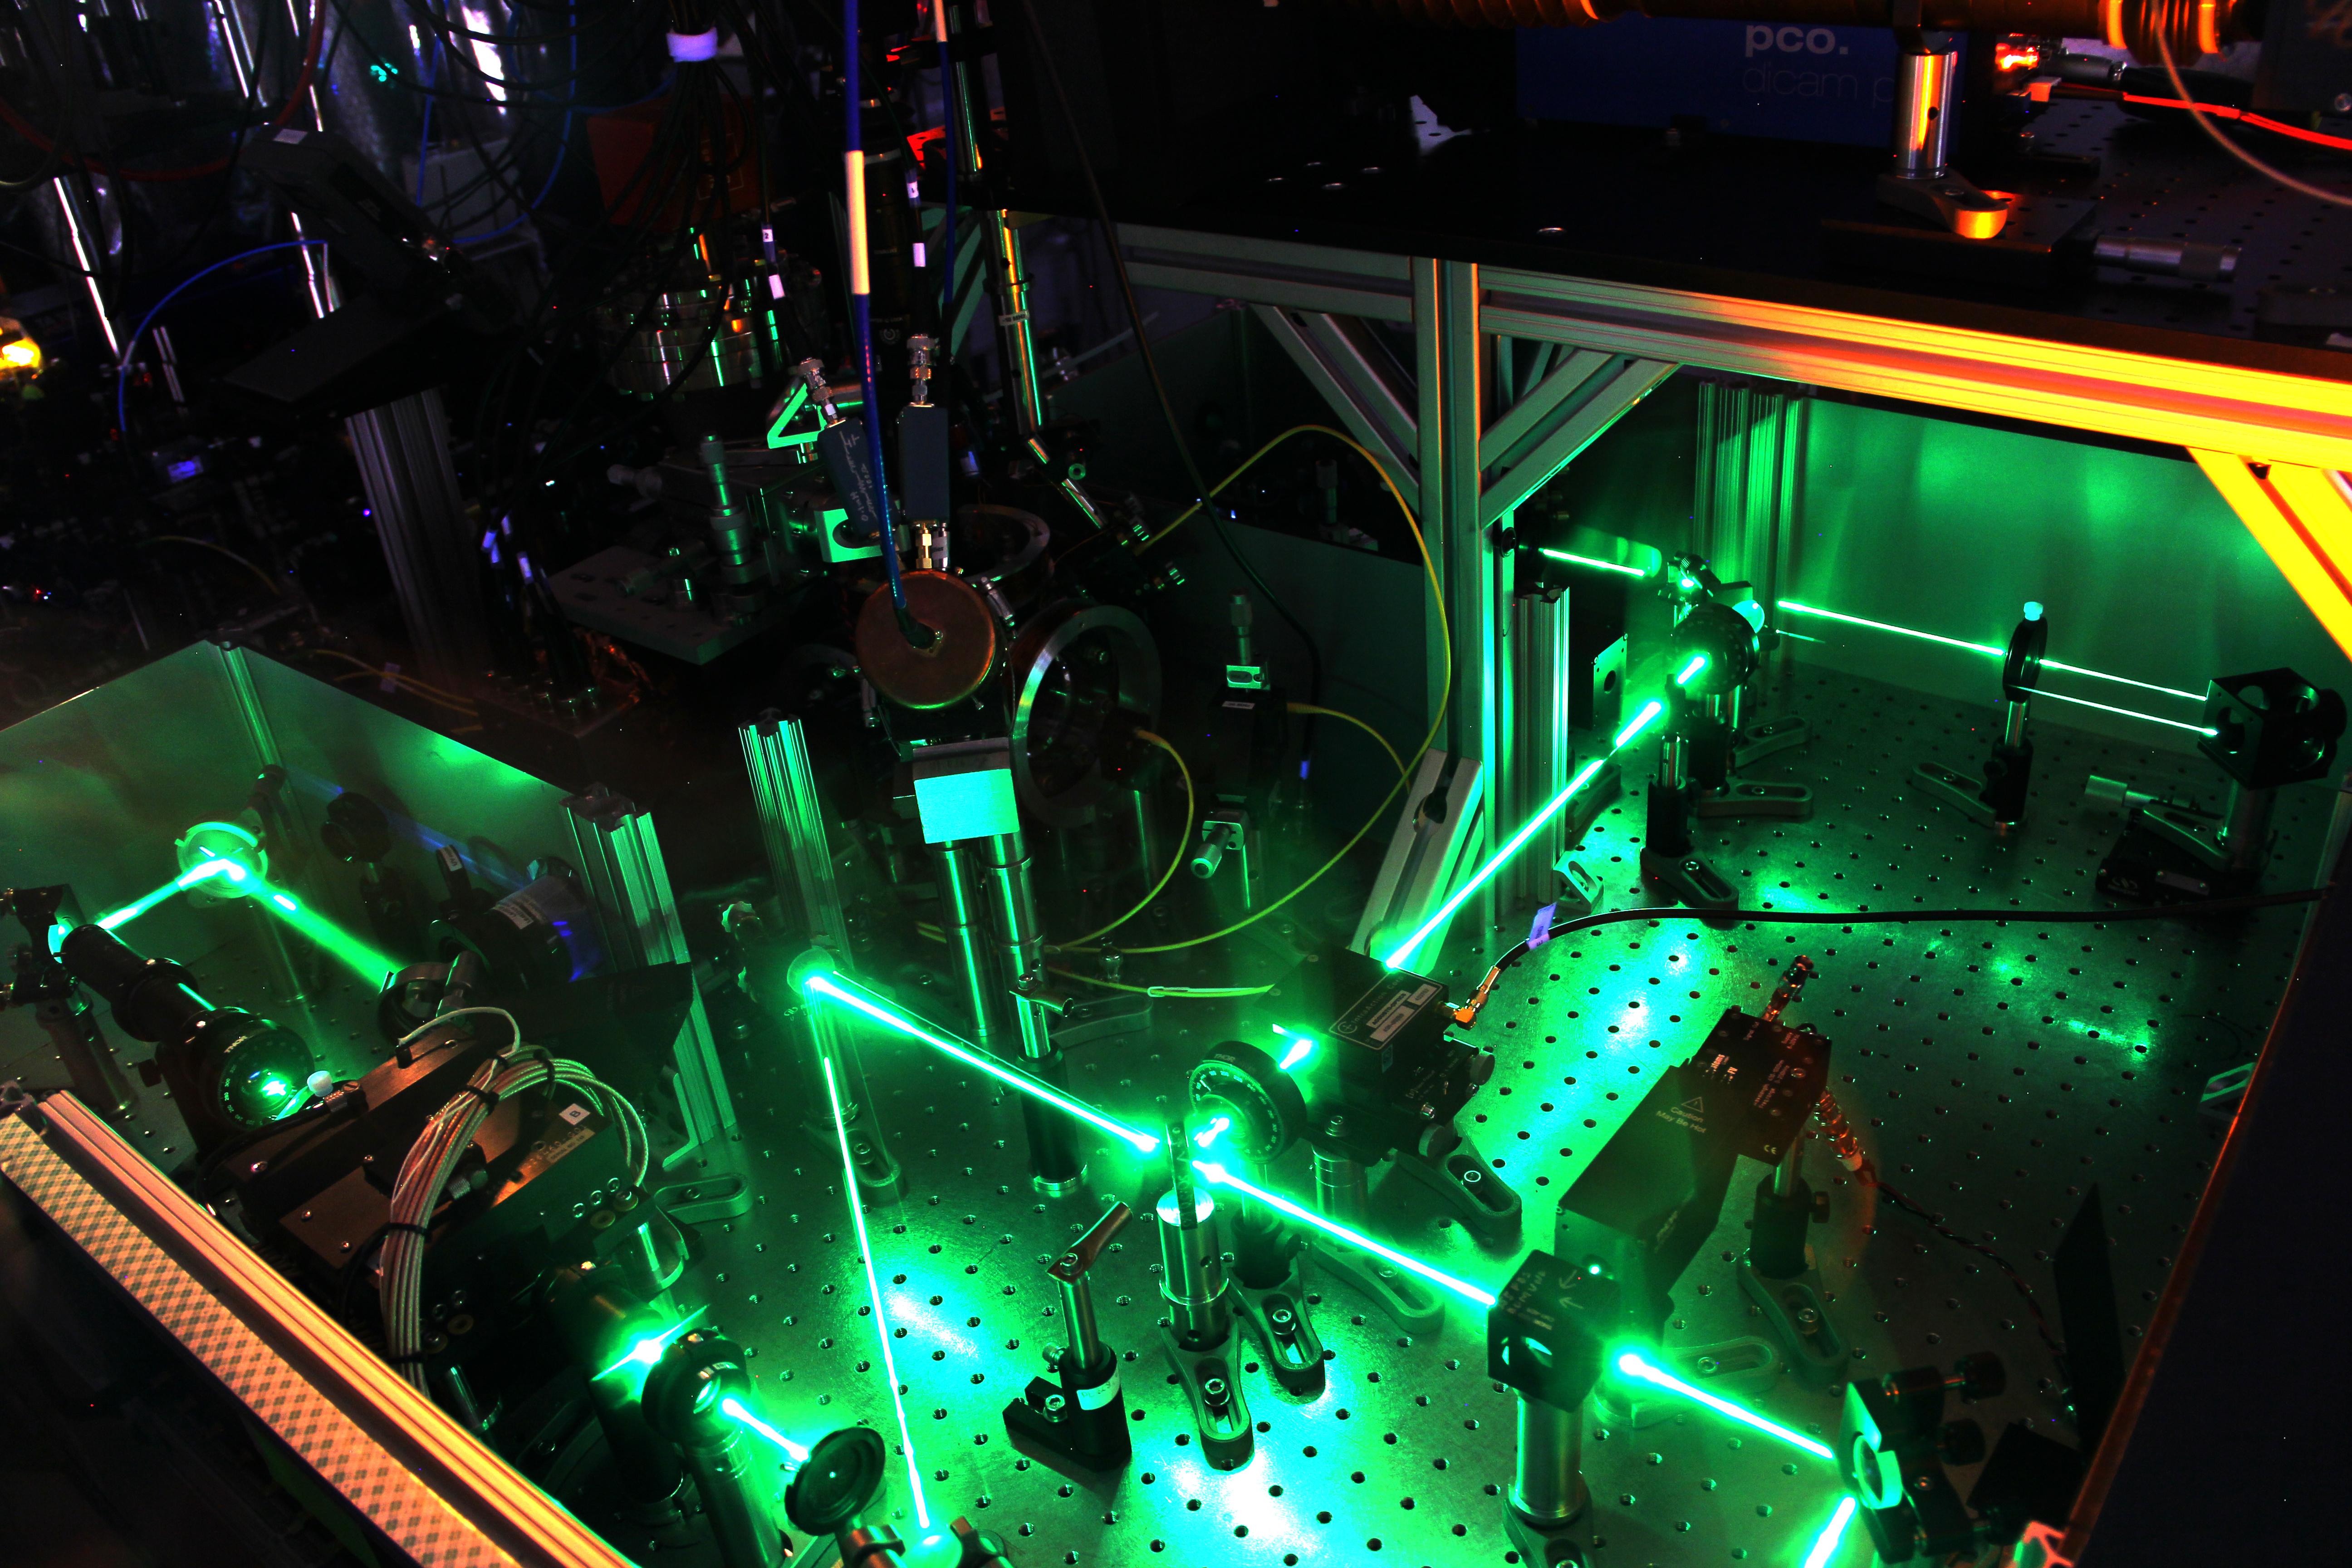 Quantum Computers using green lasers